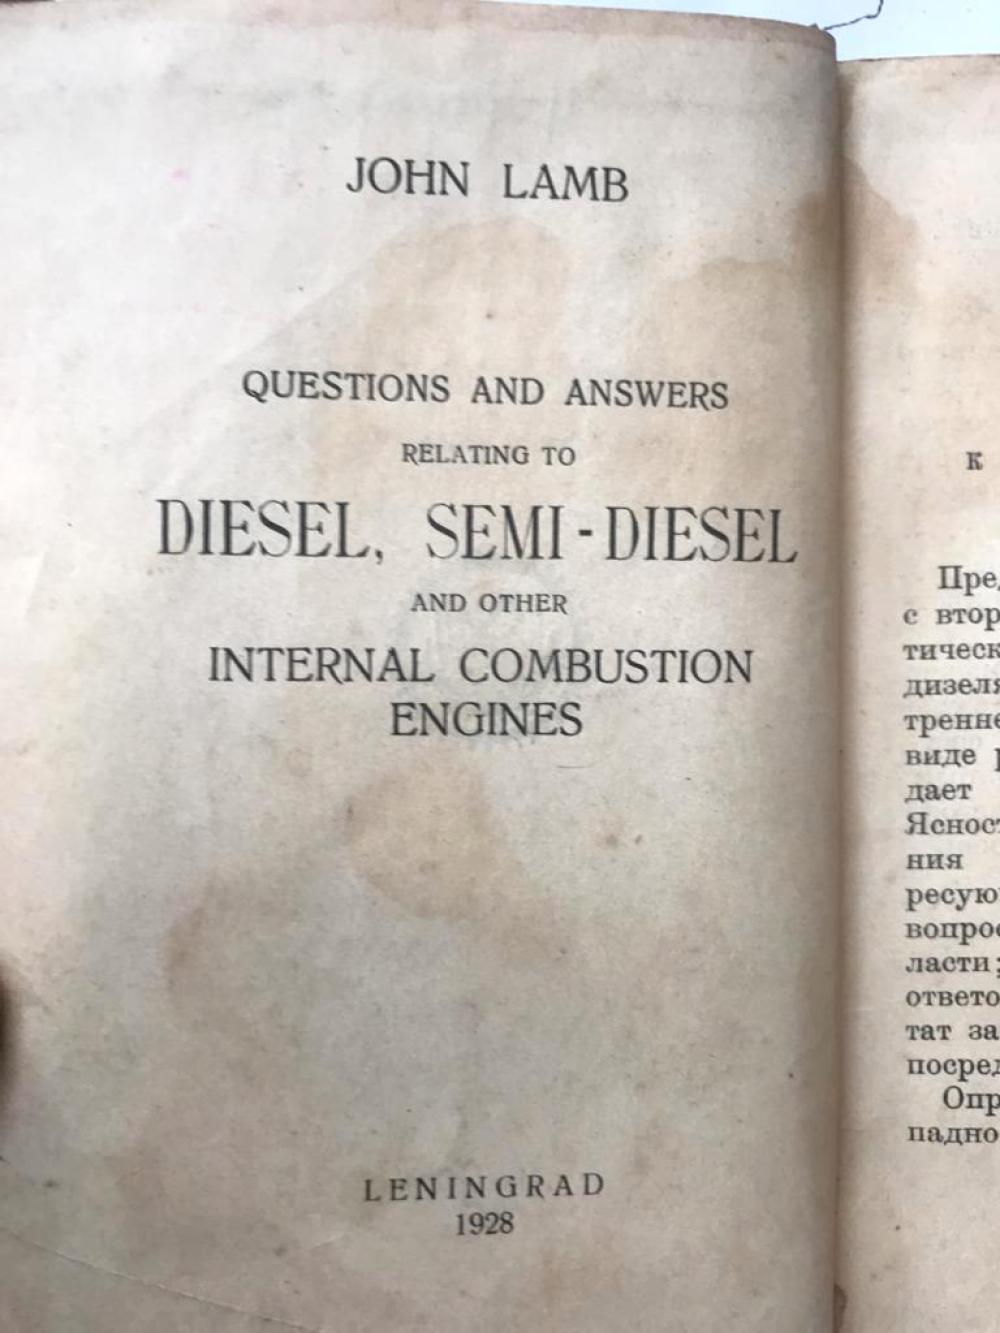 Diesel, Semi Diesel and other Internal Combustion Engines 